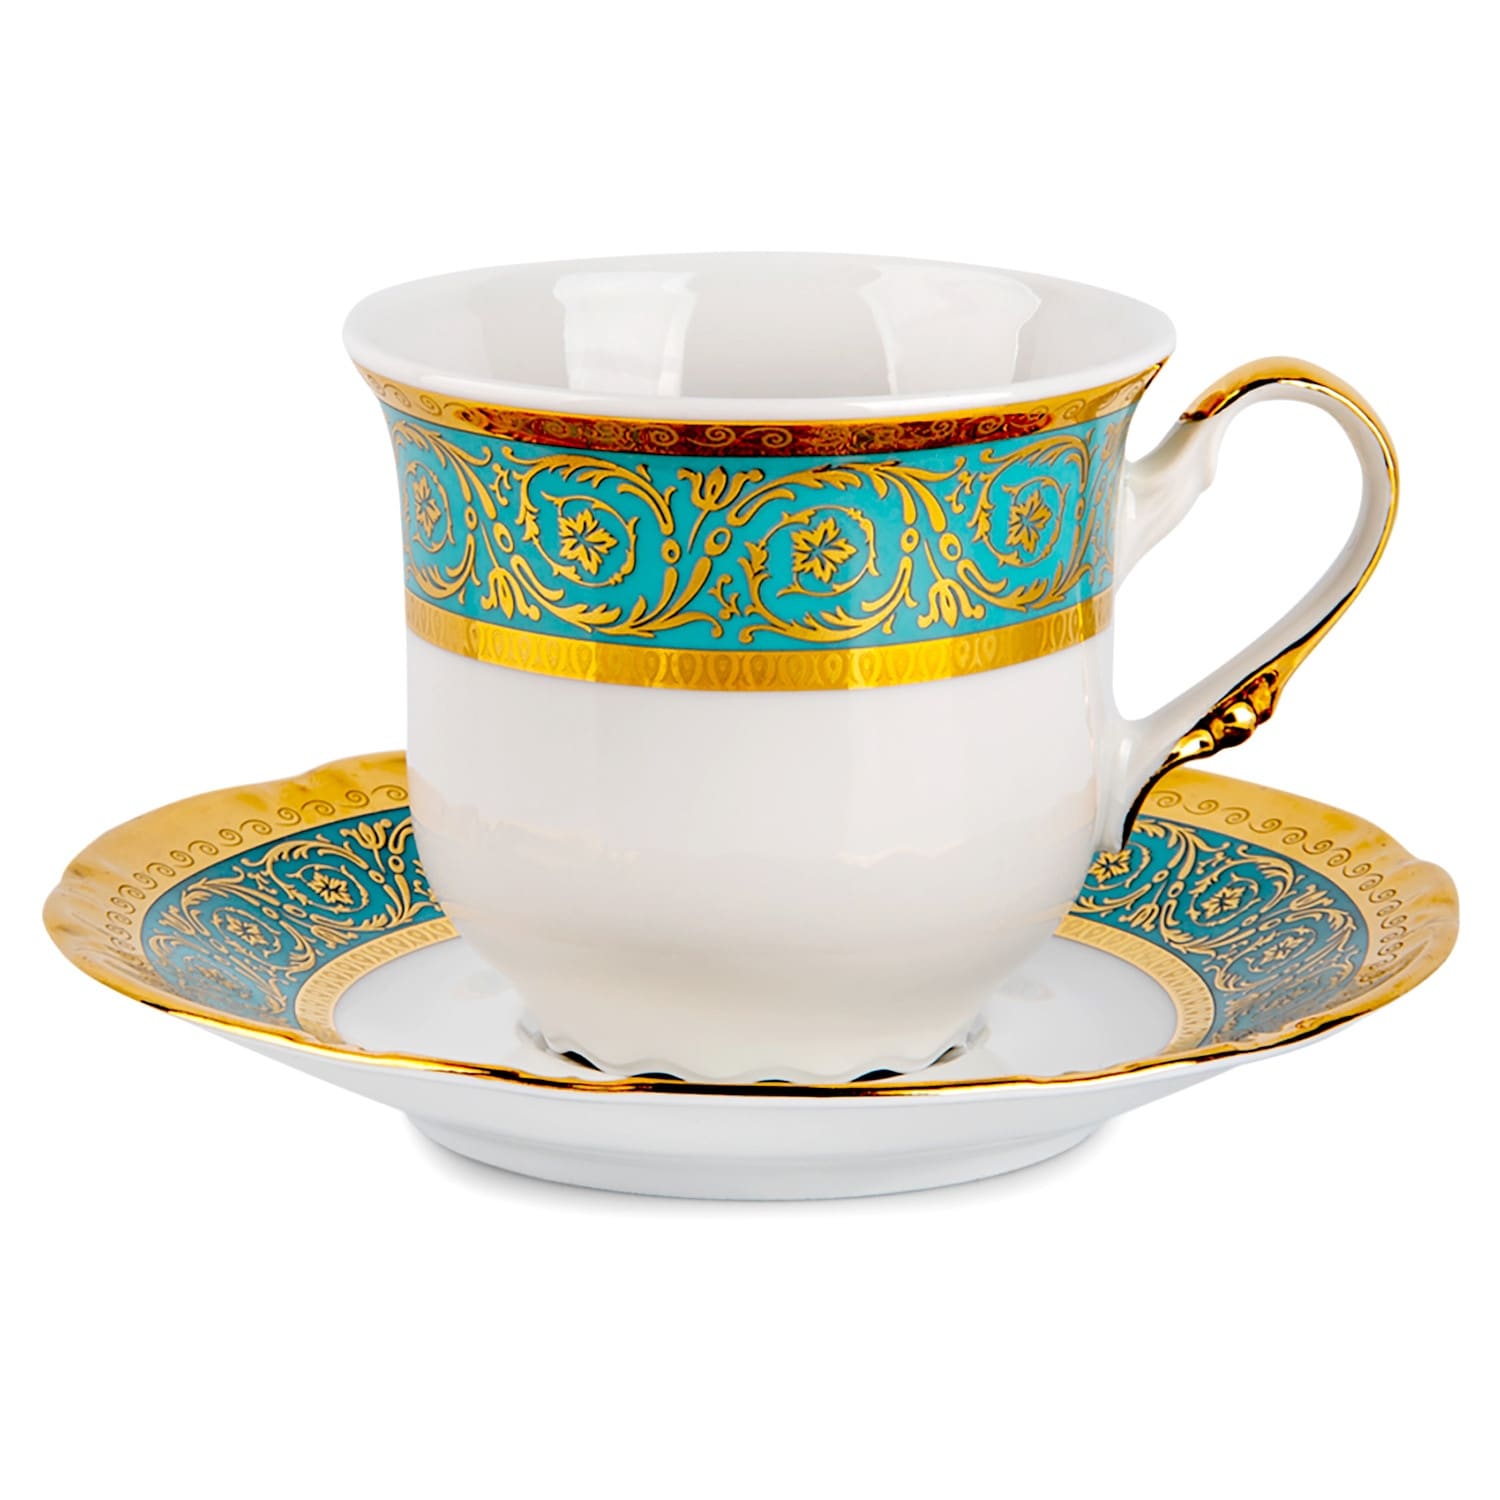 https://ak1.ostkcdn.com/images/products/is/images/direct/baf03a214ad64c7a6c39bfbe454cfe7aca6c0206/Royal-Green-Porcelain-Tea-Coffee-Cup-and-Saucer-Set.jpg